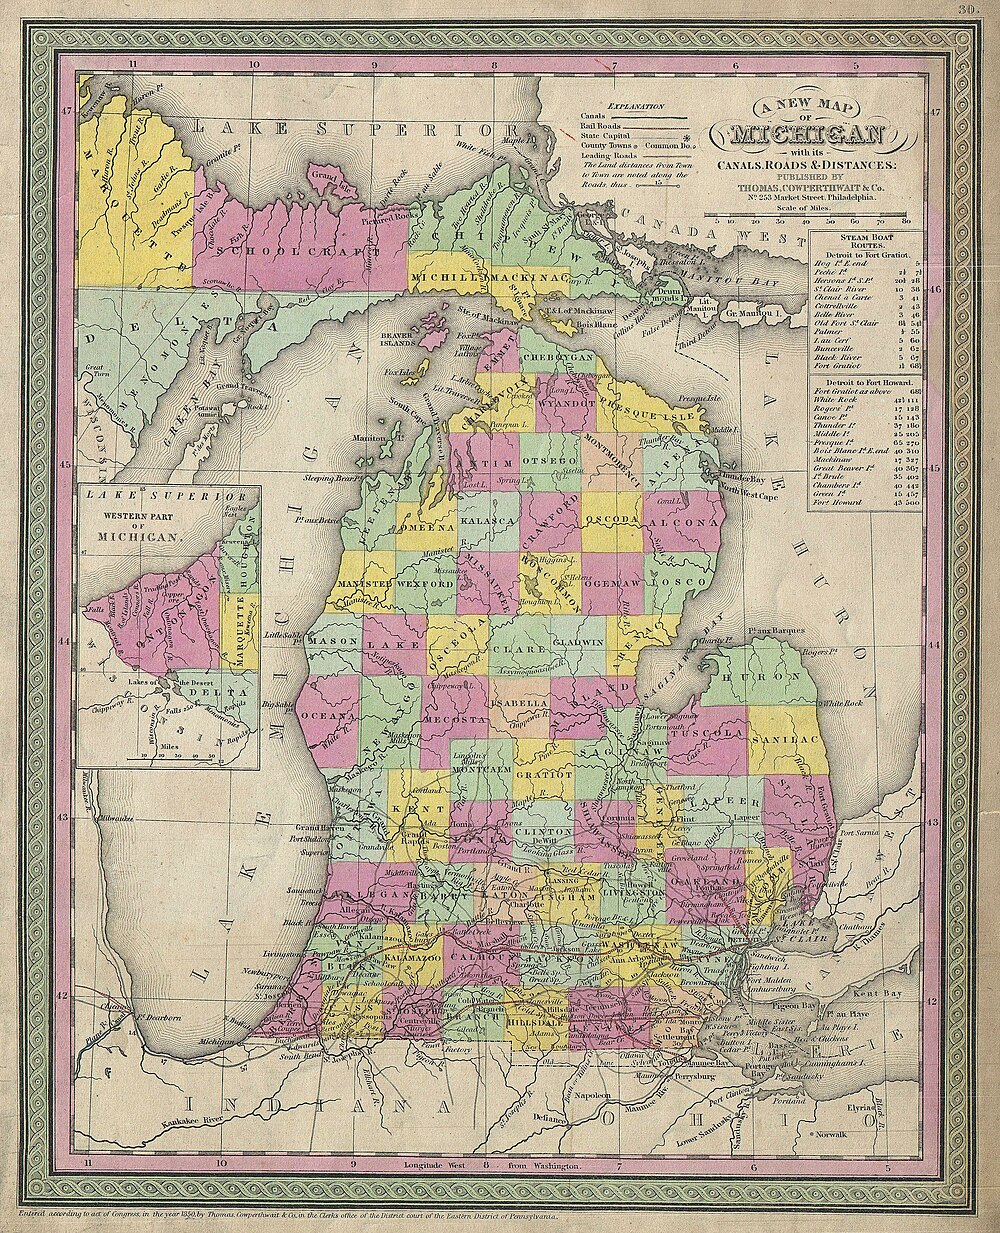 1850 map showing Cheboygan and Wyandot as separate counties.